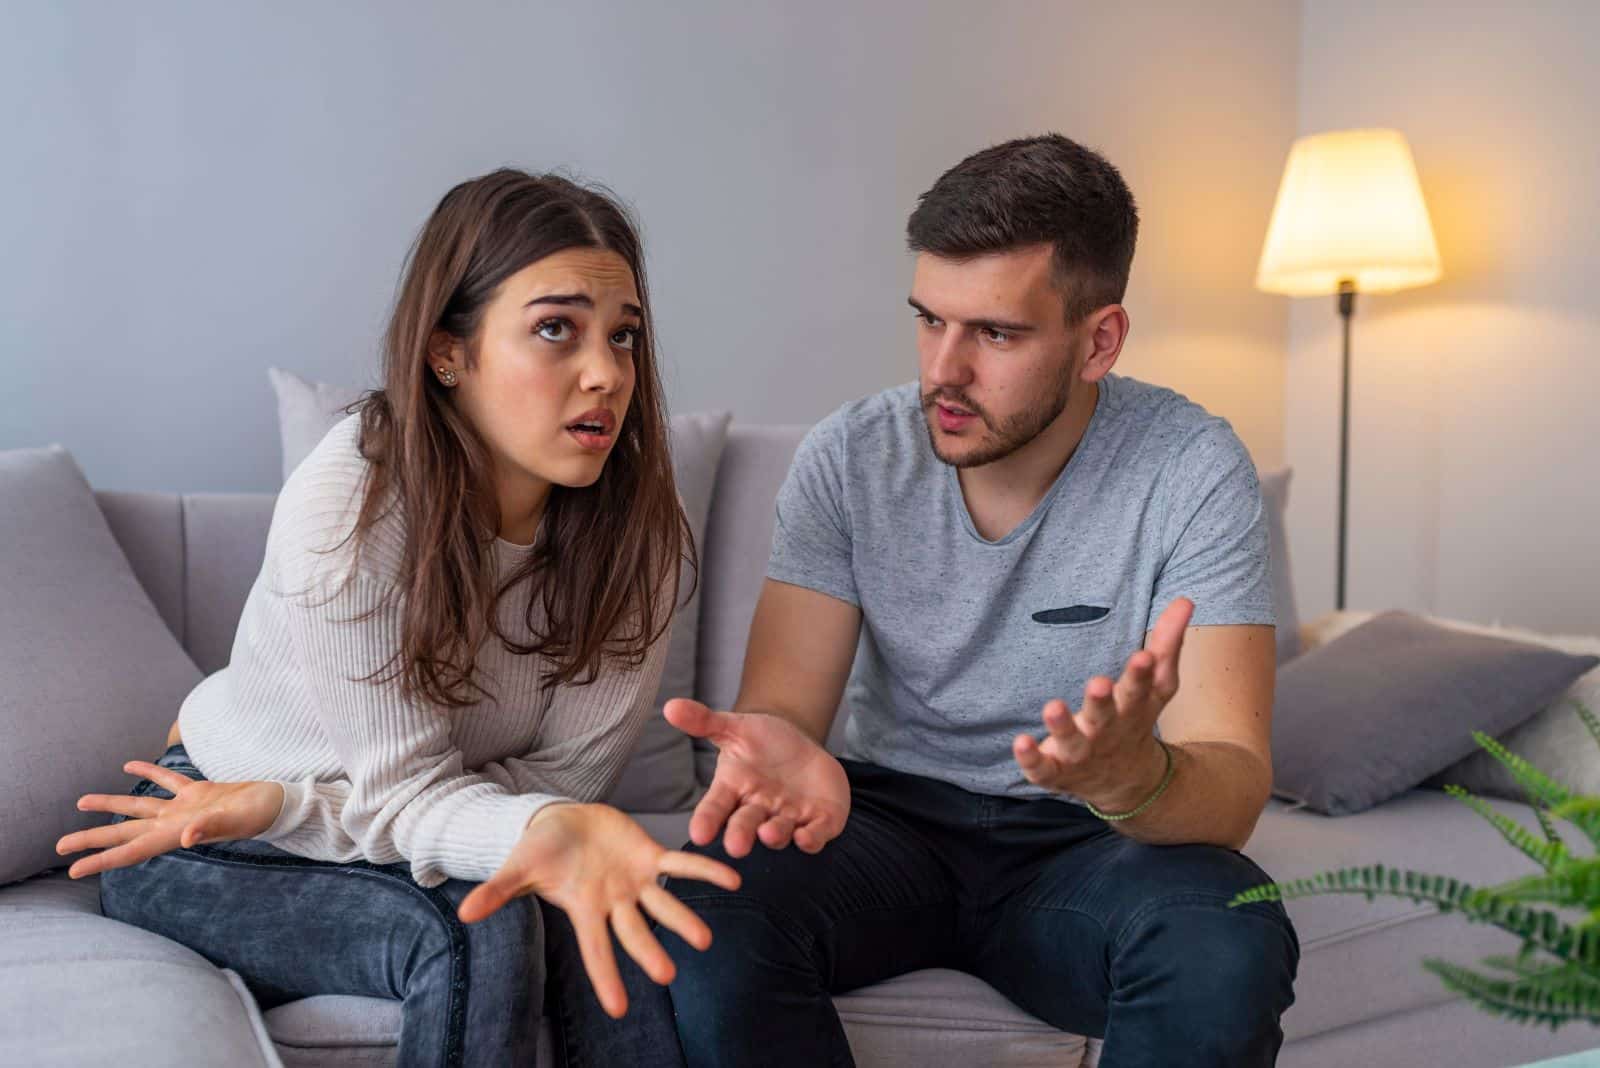 Image Credit: Shutterstock / Dragana Gordic <p><span>Frame your feelings as an expression of honesty, not a demand. “I’m sharing this with you not to pressure you into feeling the same, but because I believe in being open about my feelings.” Avoiding ultimatums is crucial for maintaining a healthy relationship dynamic, reflecting principles from conflict resolution that emphasize mutual respect and understanding.</span></p>